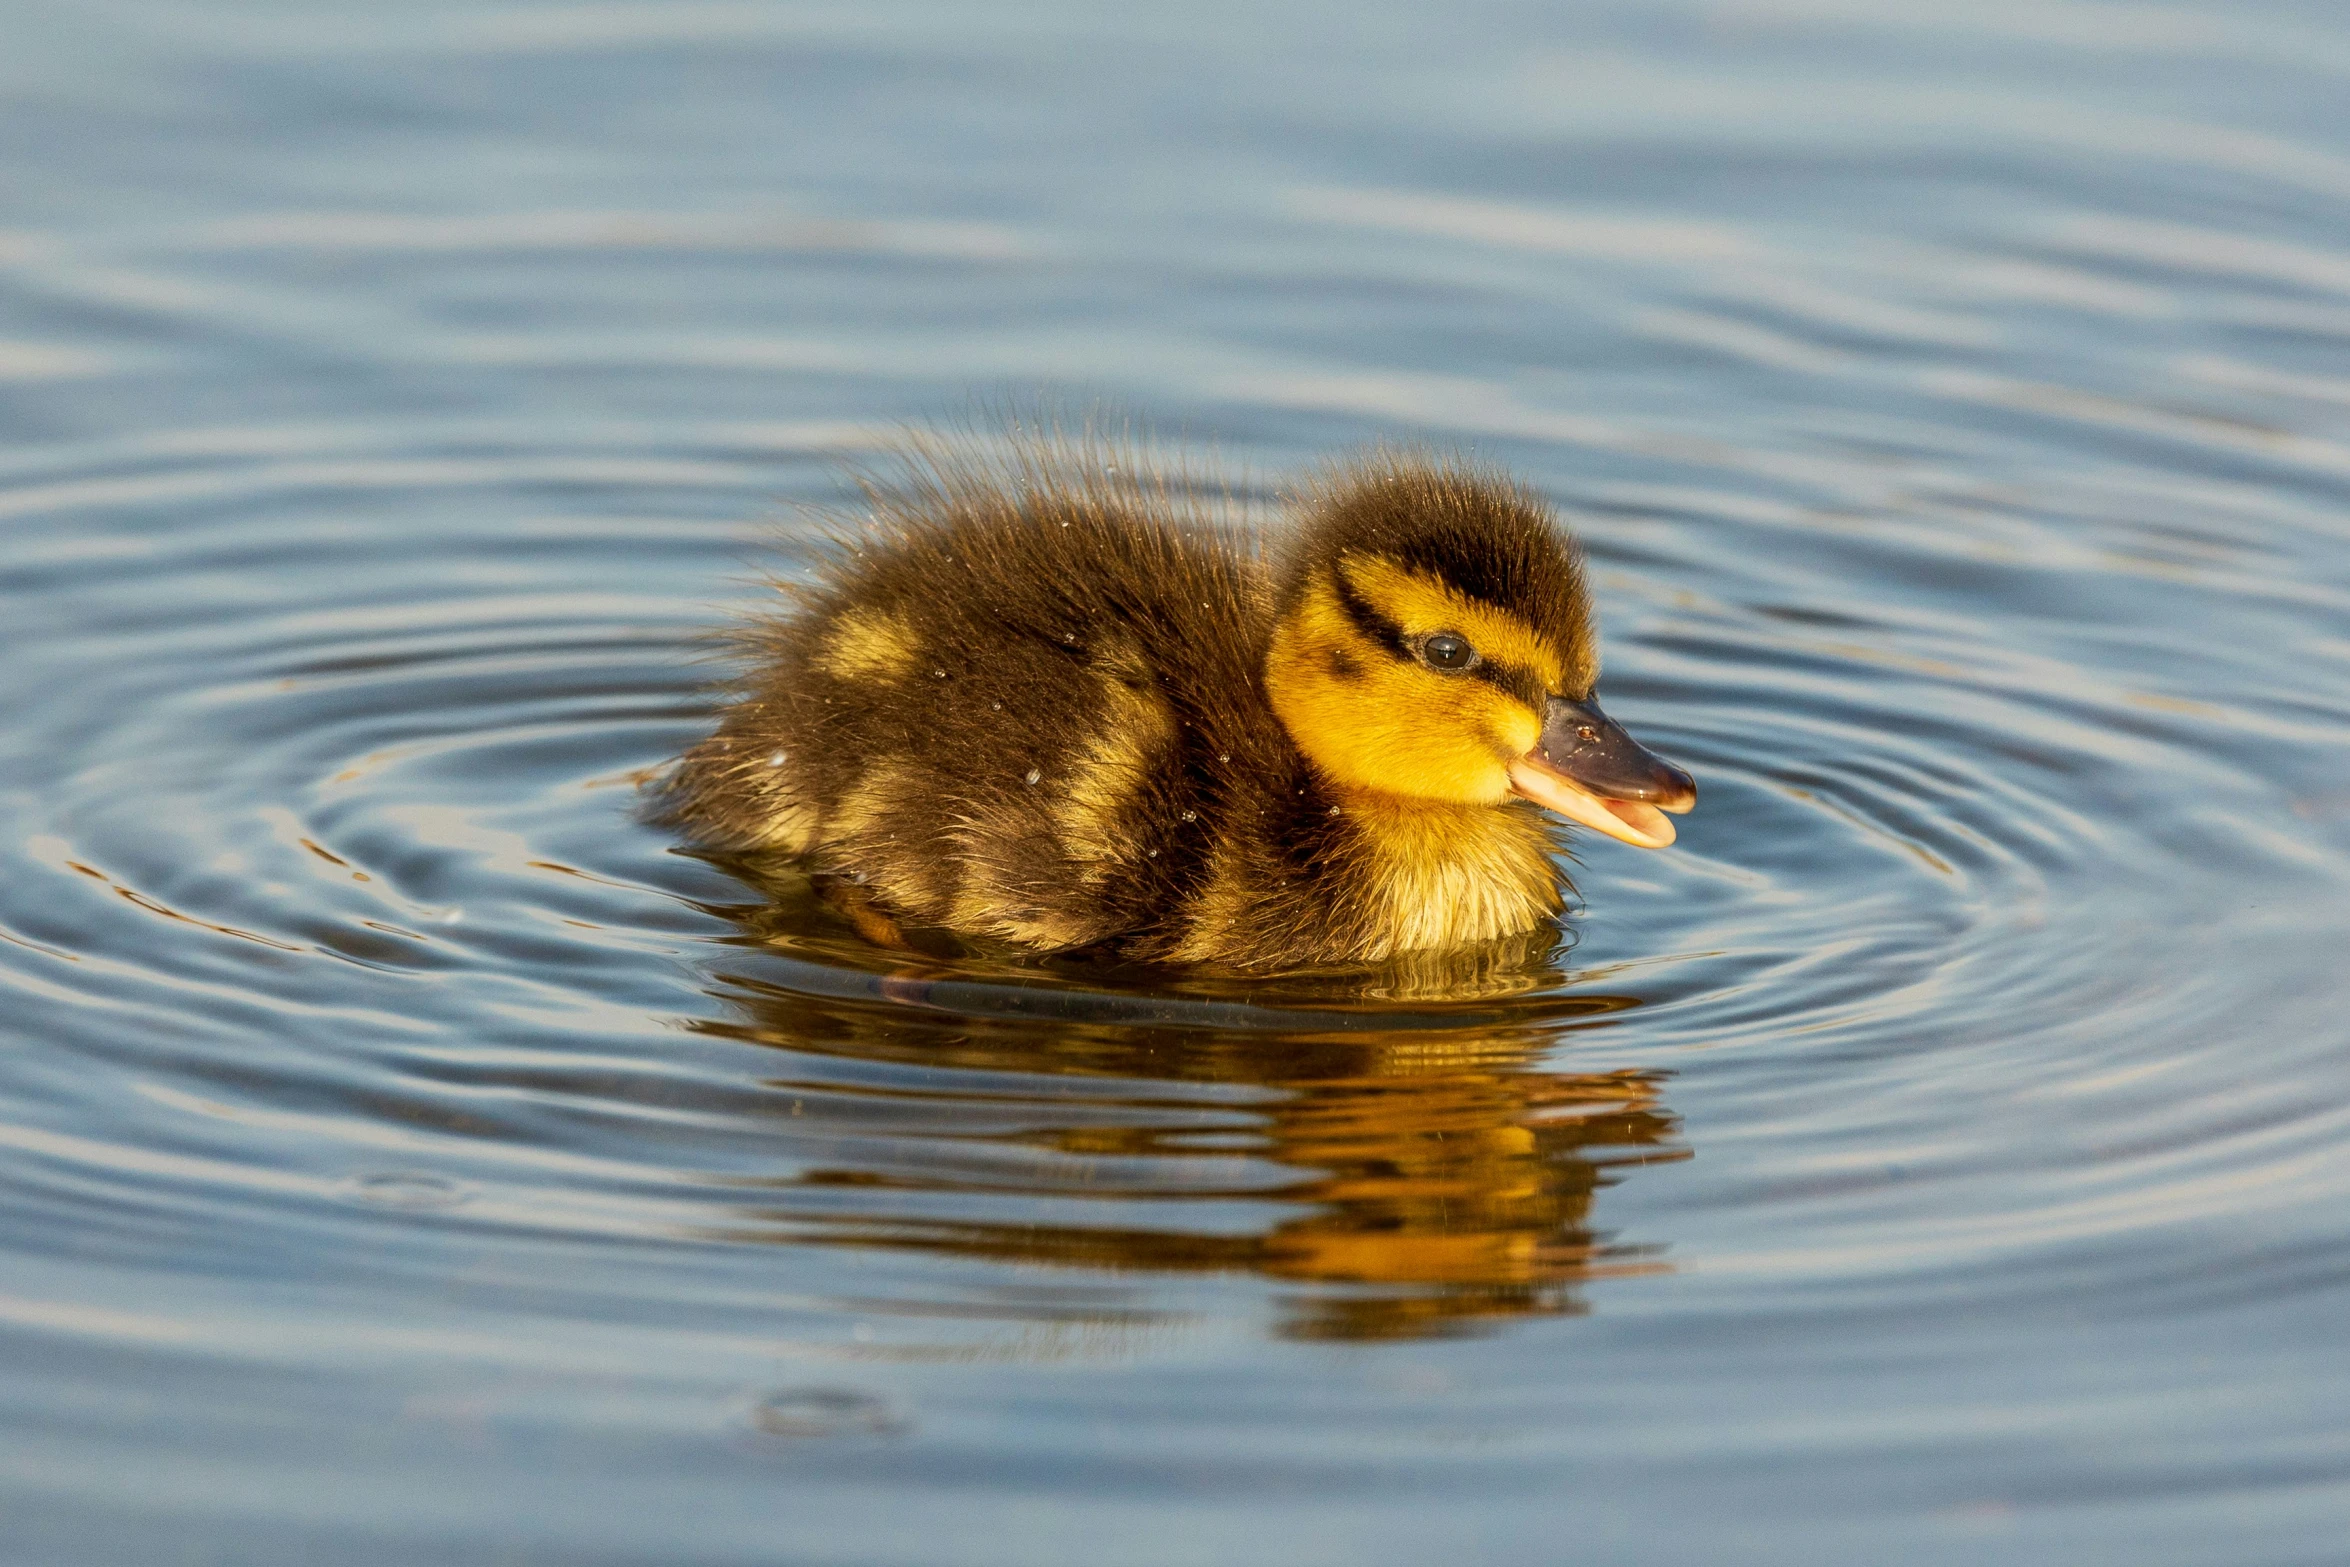 the baby duck is in the small pond